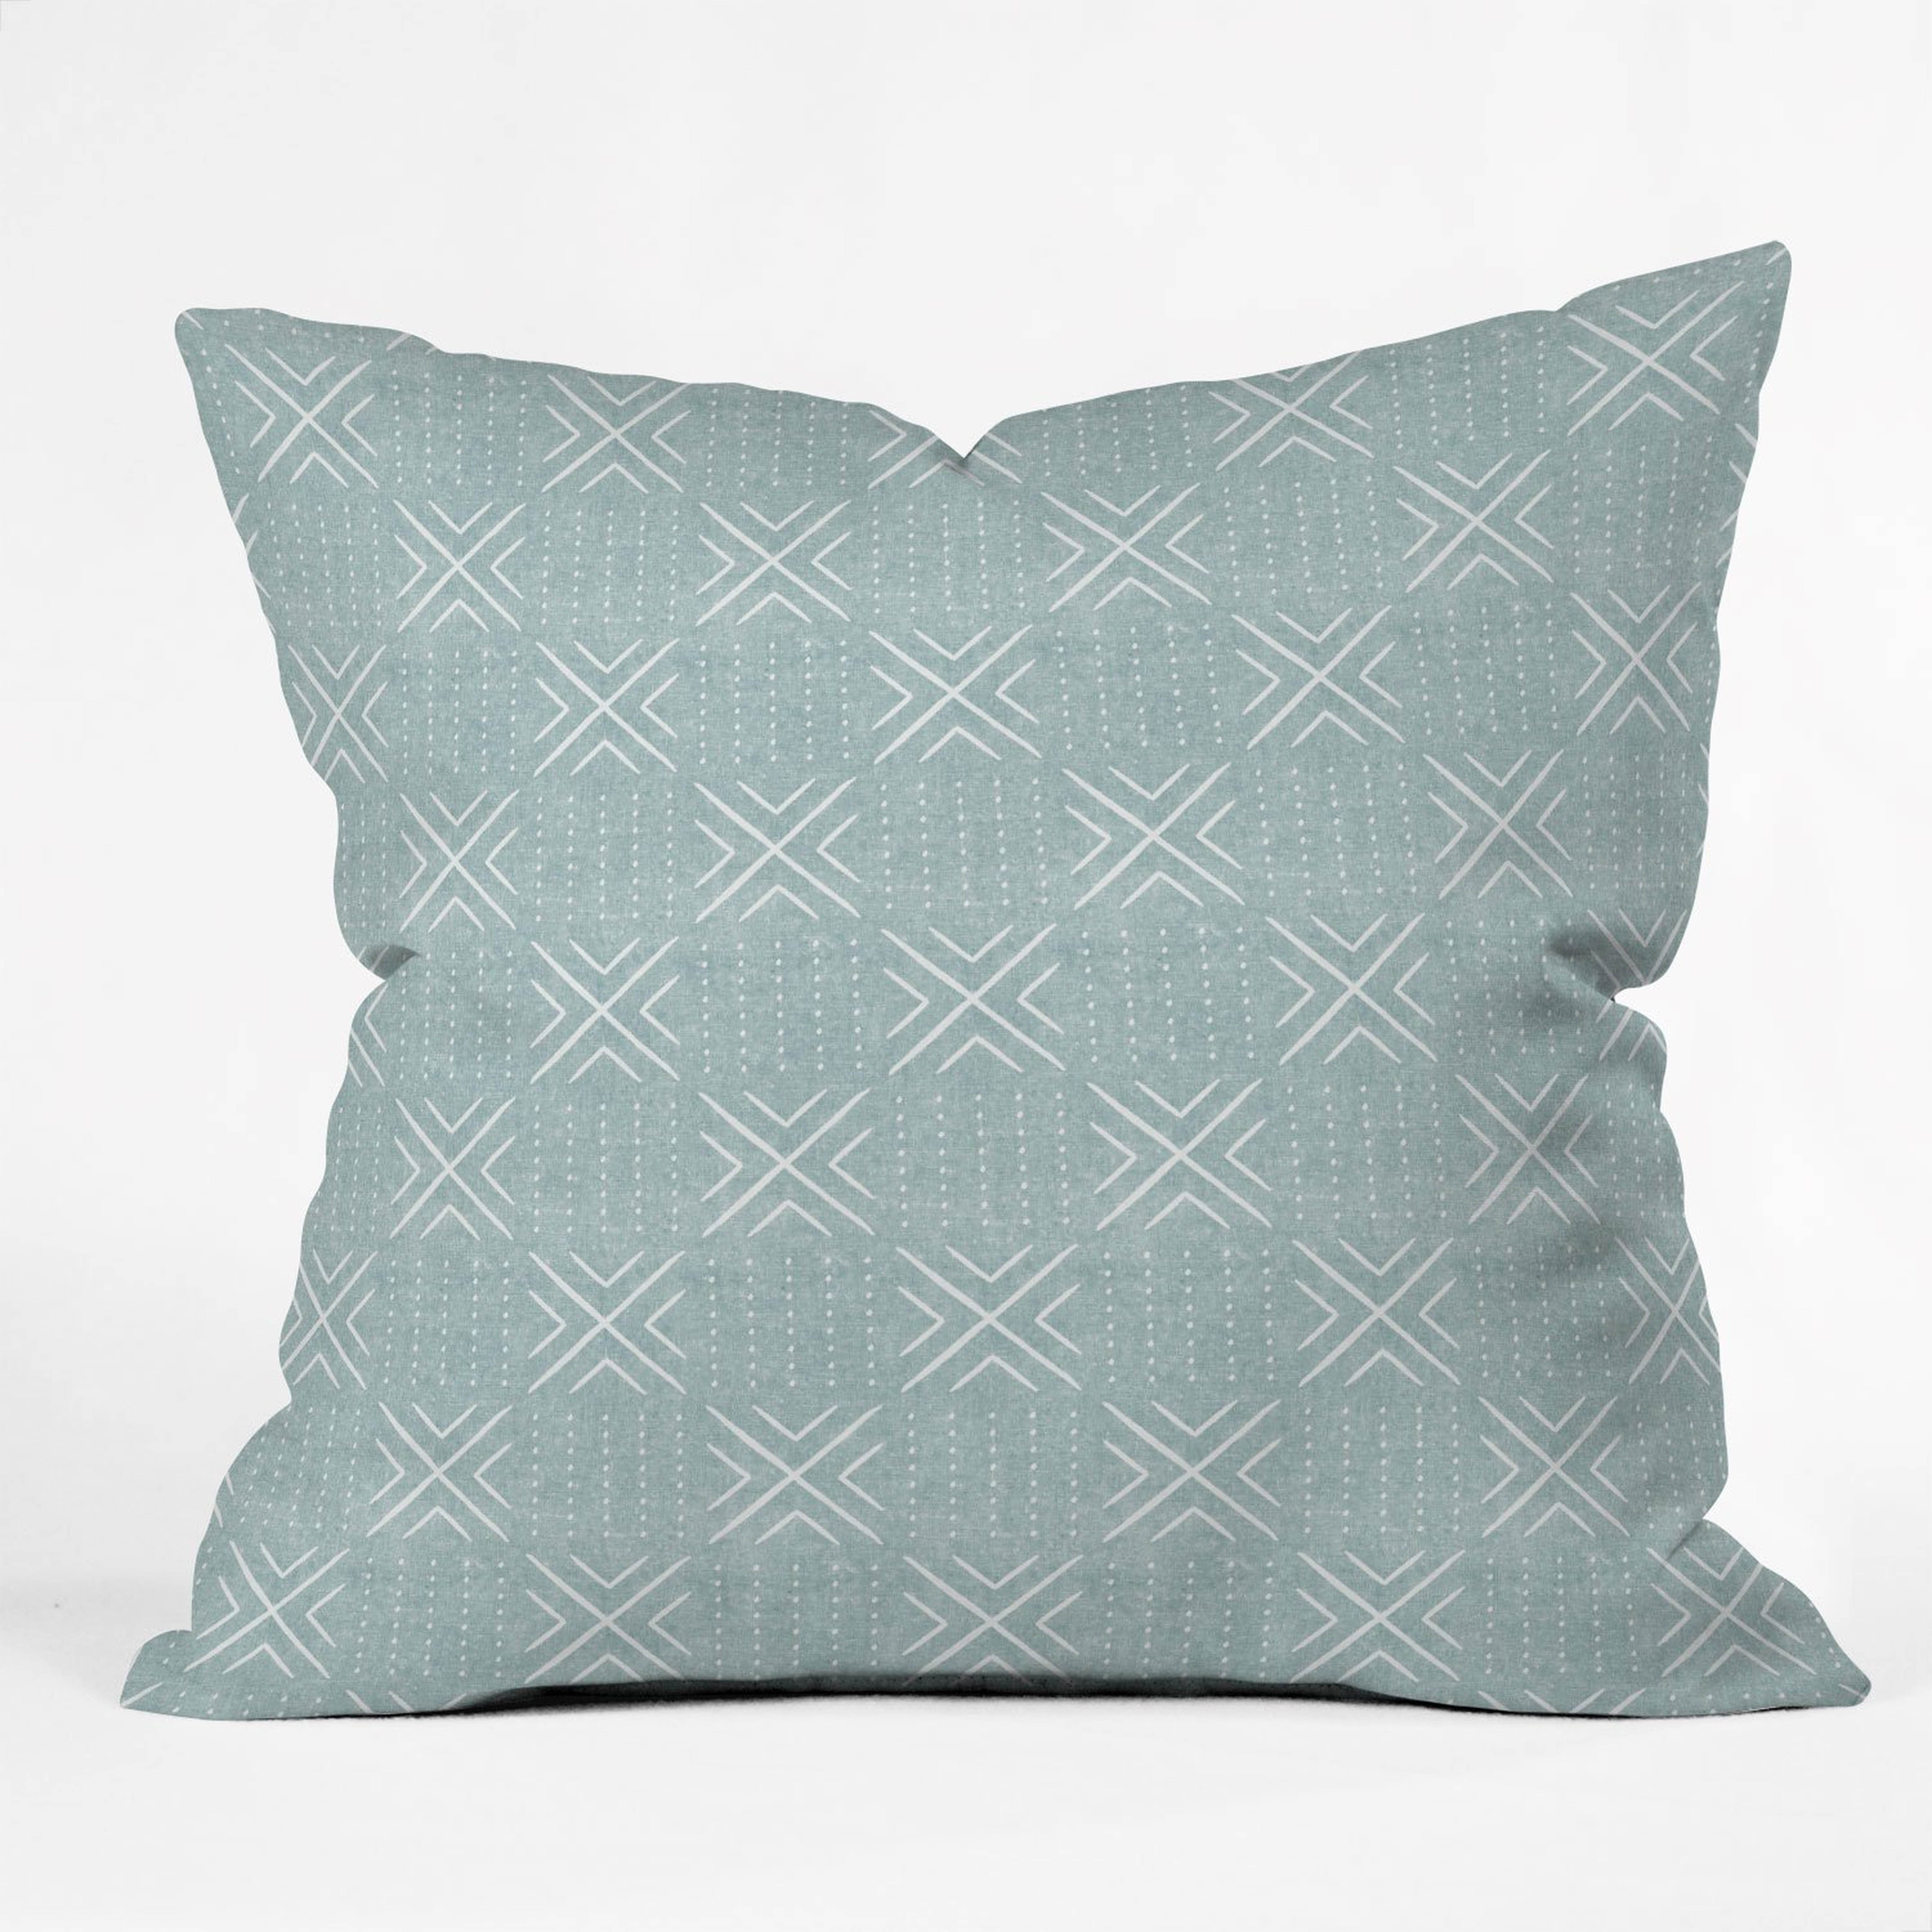 MUD CLOTH TILE DUSTY BLUE outdoor pillow - 18x18 - Wander Print Co.